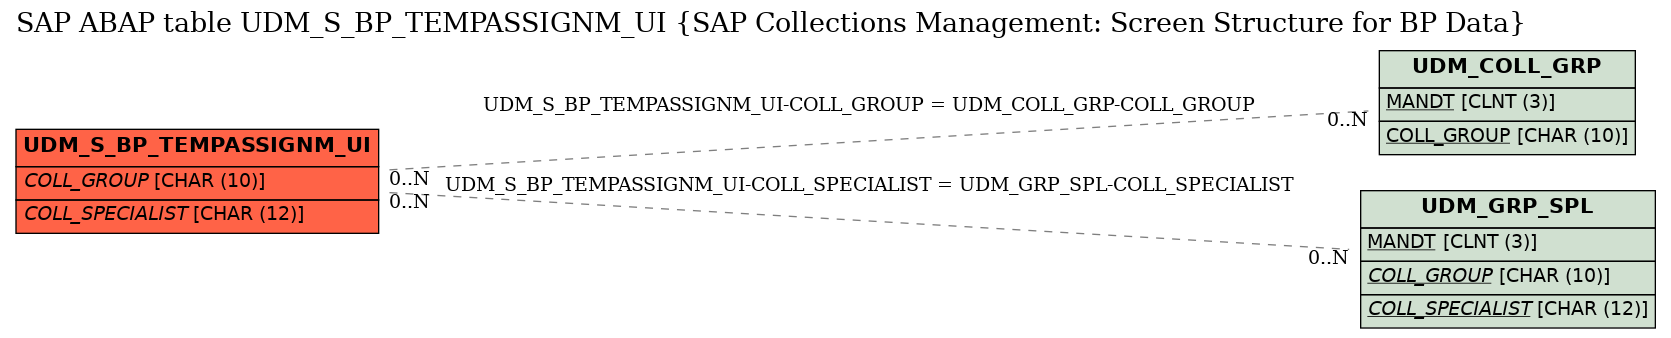 E-R Diagram for table UDM_S_BP_TEMPASSIGNM_UI (SAP Collections Management: Screen Structure for BP Data)